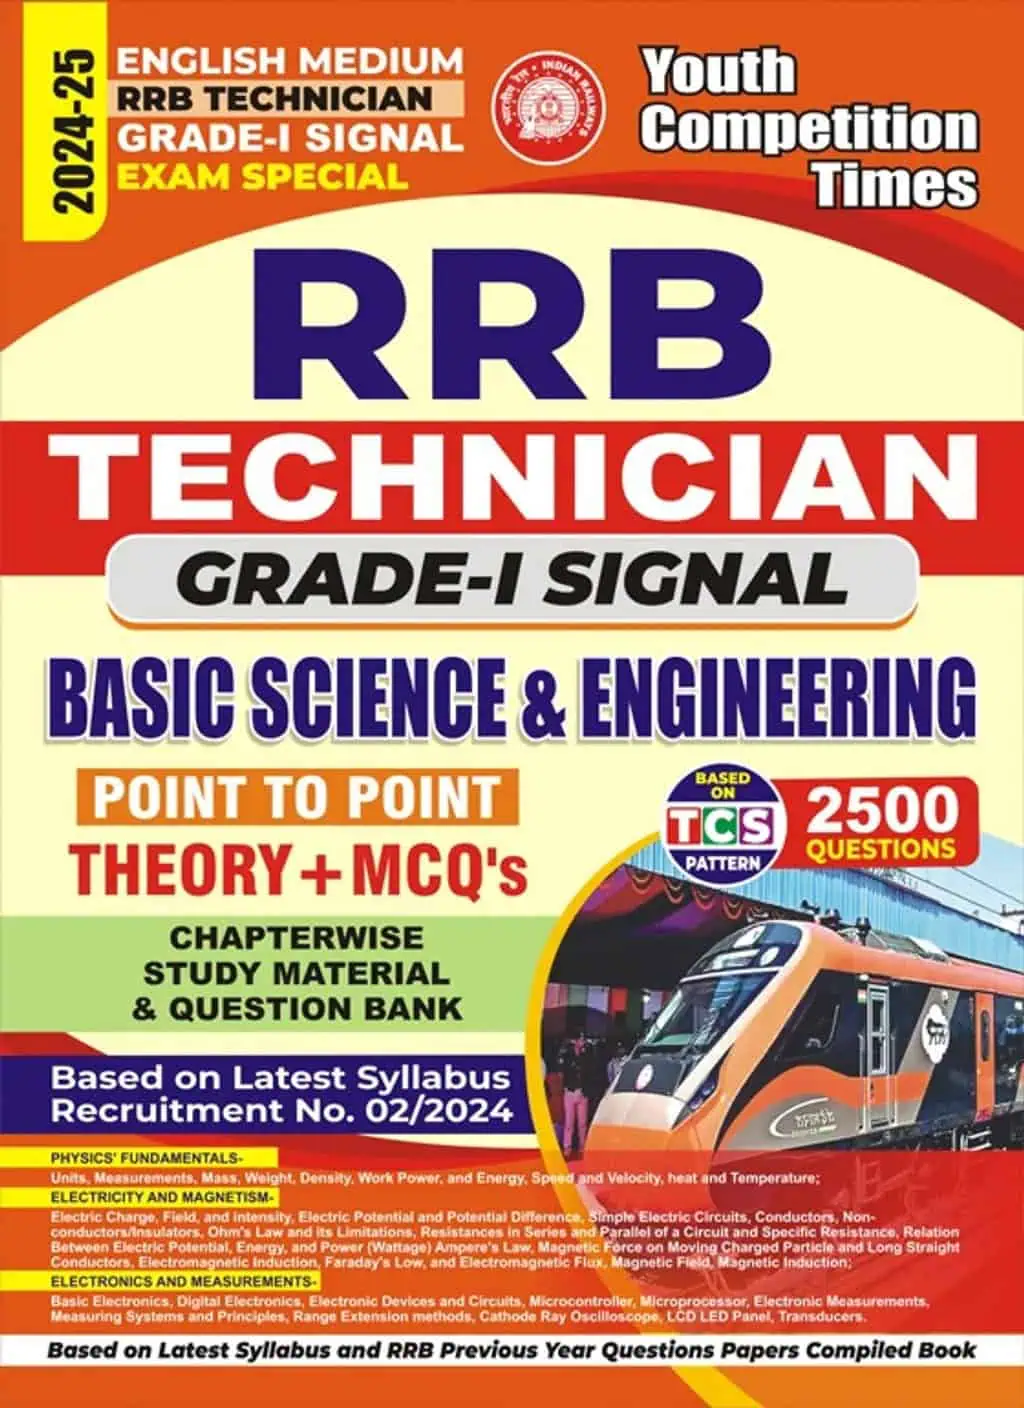 YCT 2024-25 RRB TECHNICIAN GRADE-1 SIGNAL Point to Point Theory + MCQs Basic Science & Engineering PDF